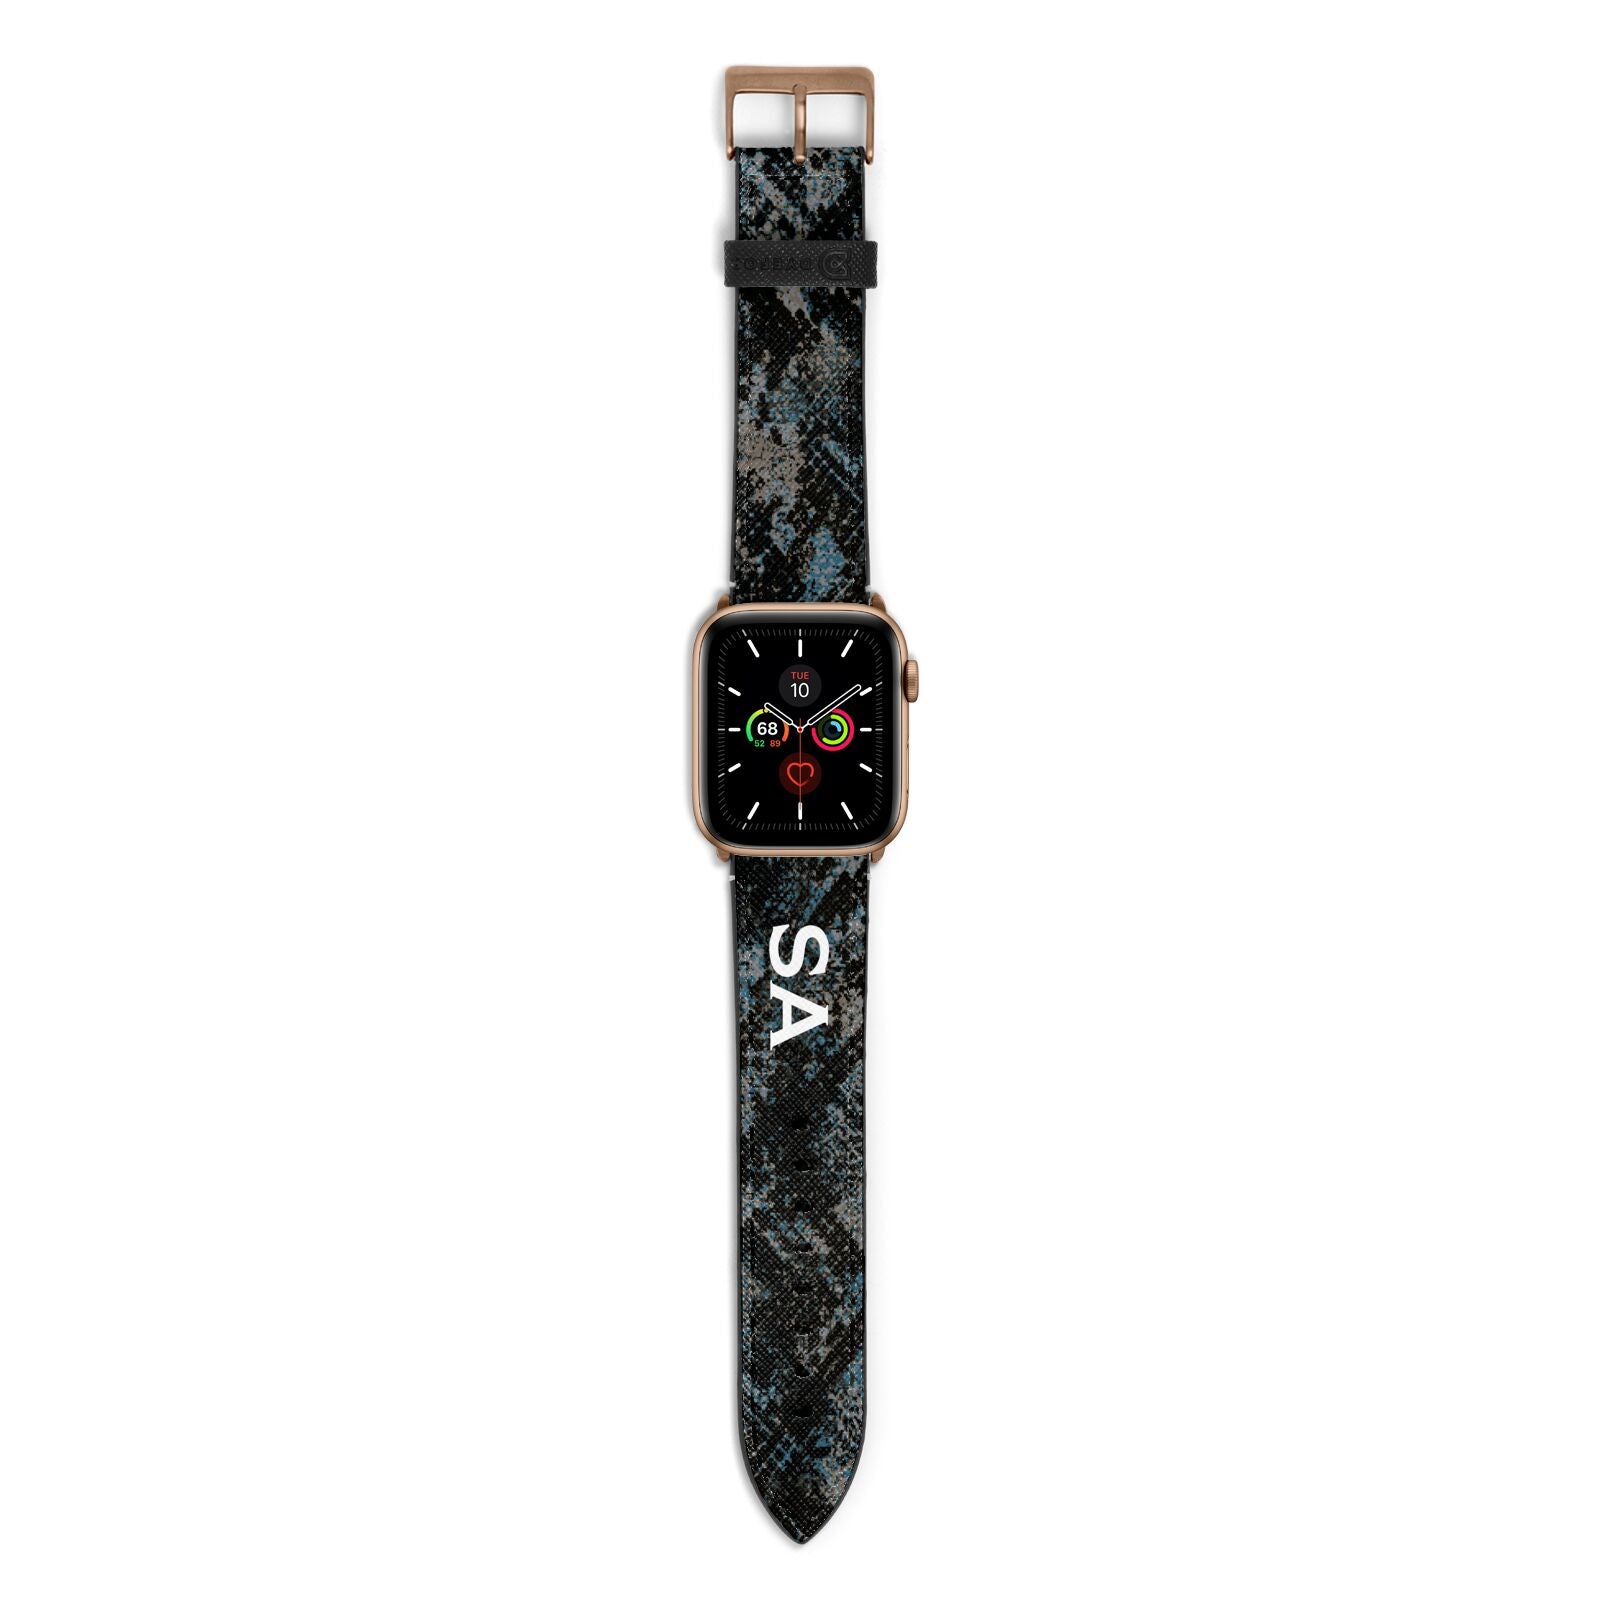 Personalised Snakeskin Effect Apple Watch Strap with Gold Hardware